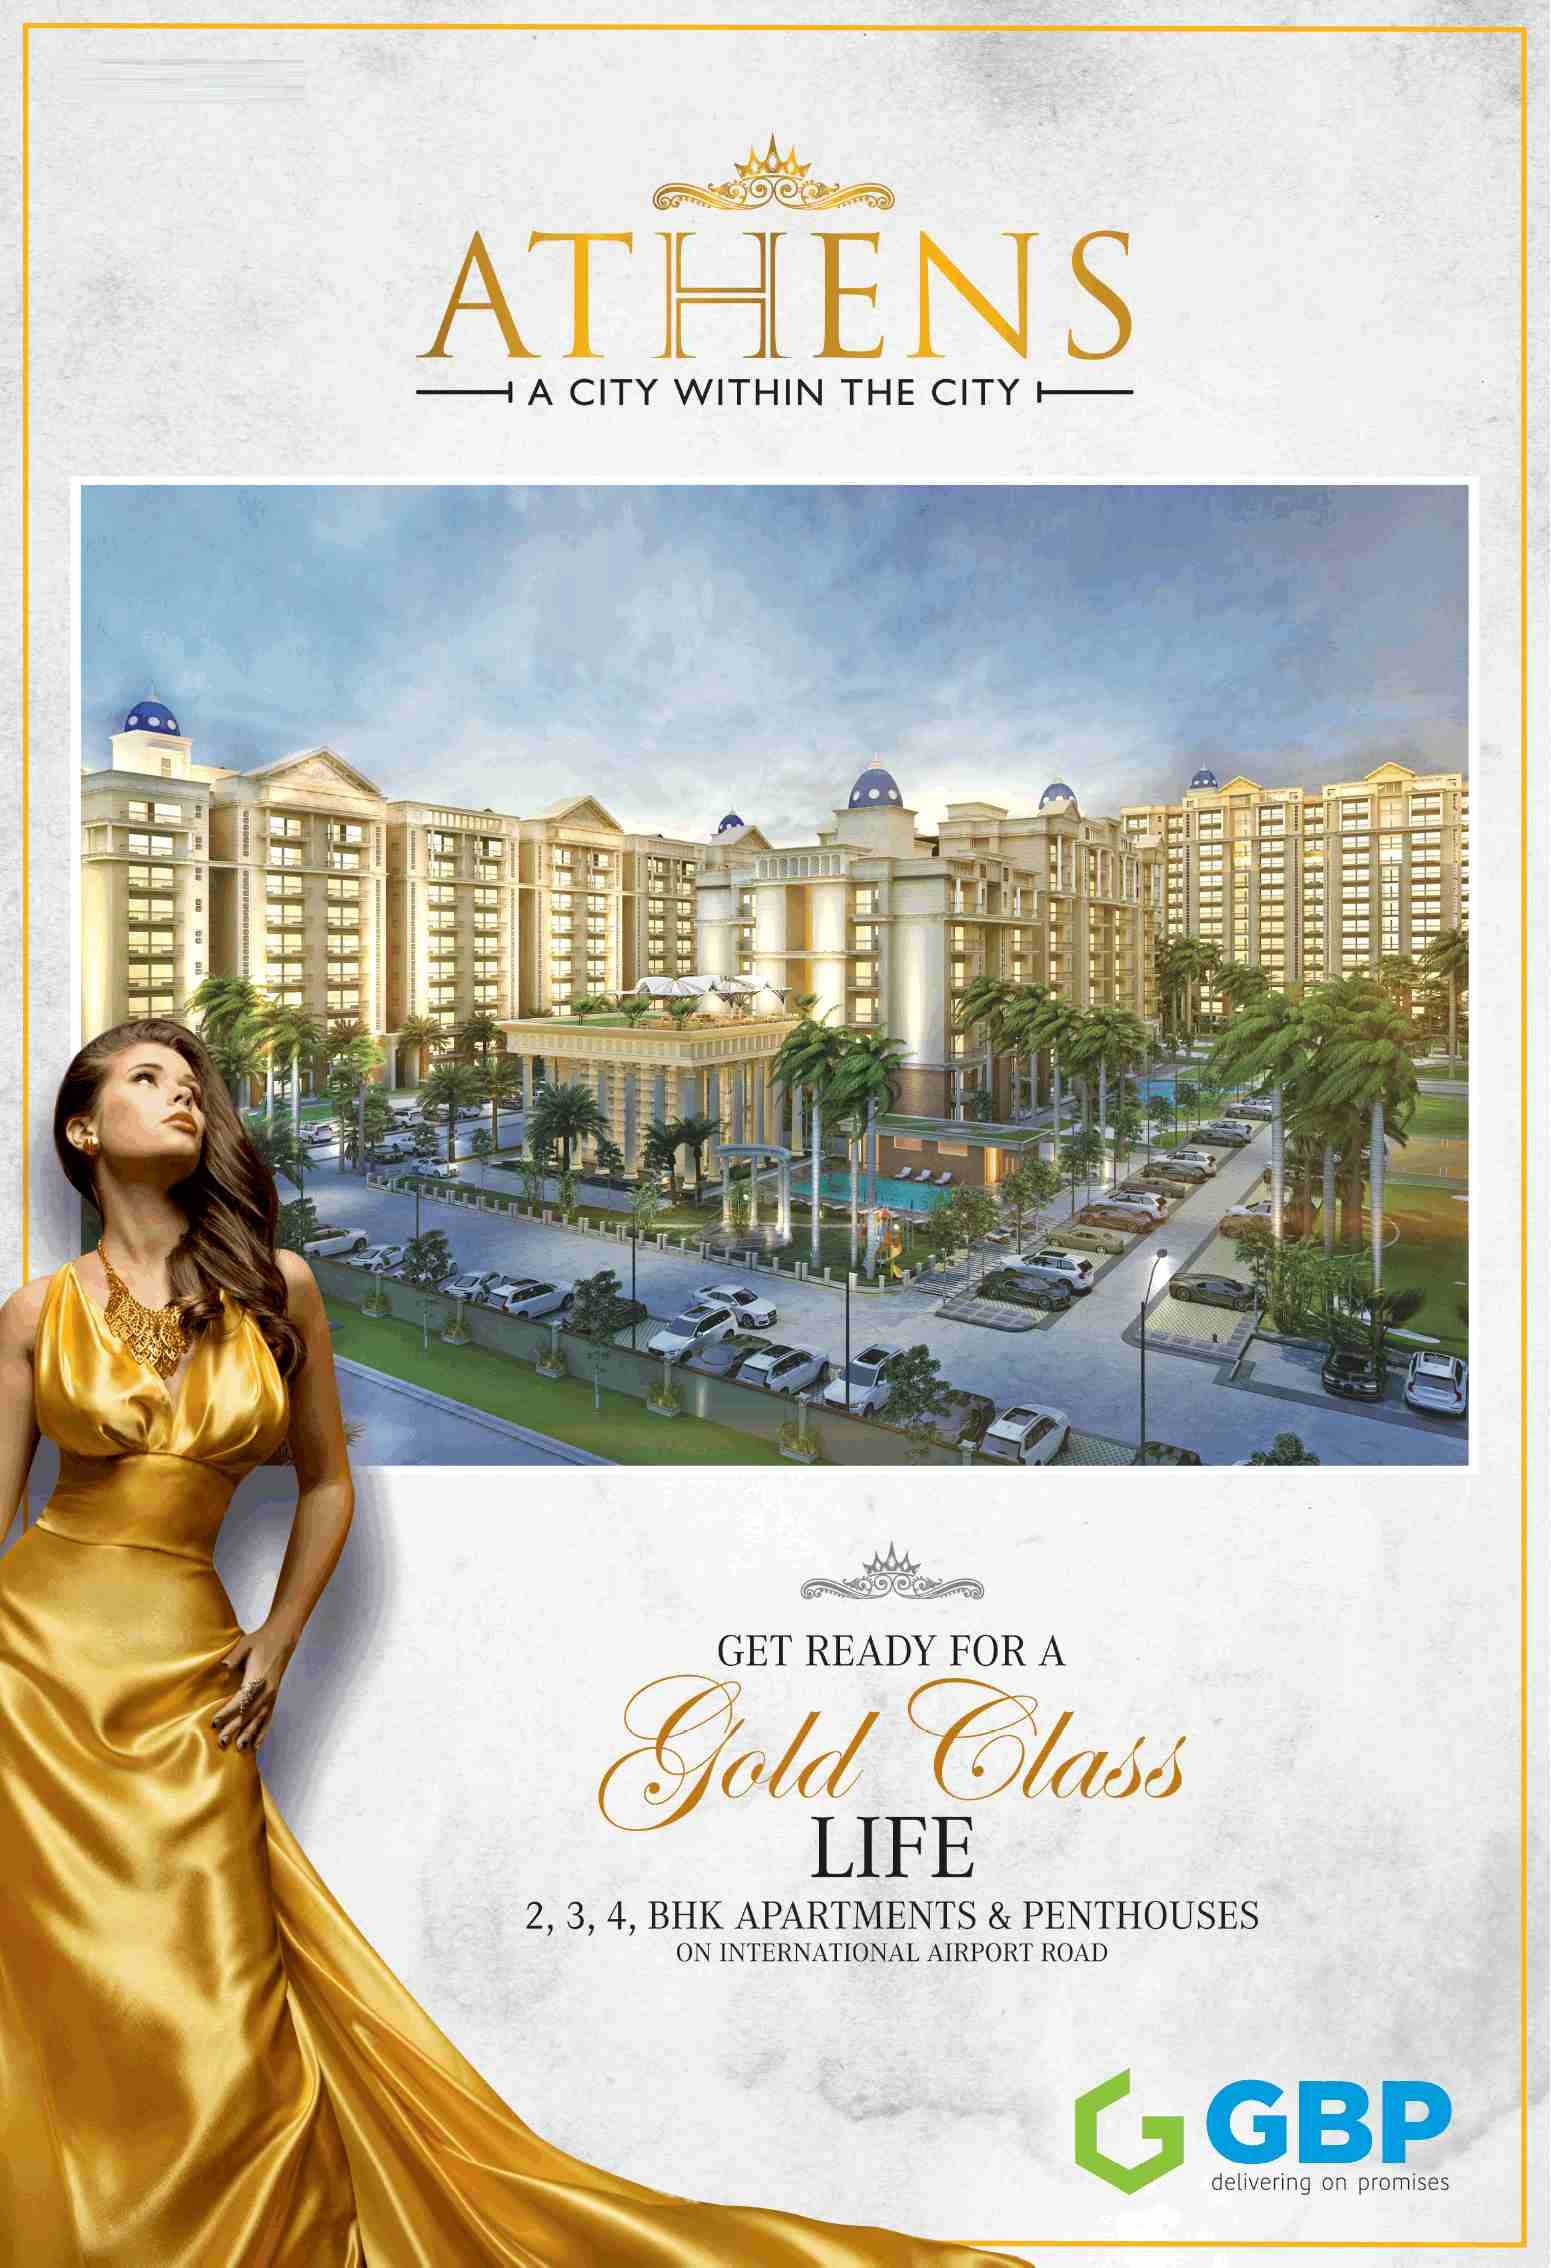 Live a gold class life at GBP Athens in Chandigarh Update